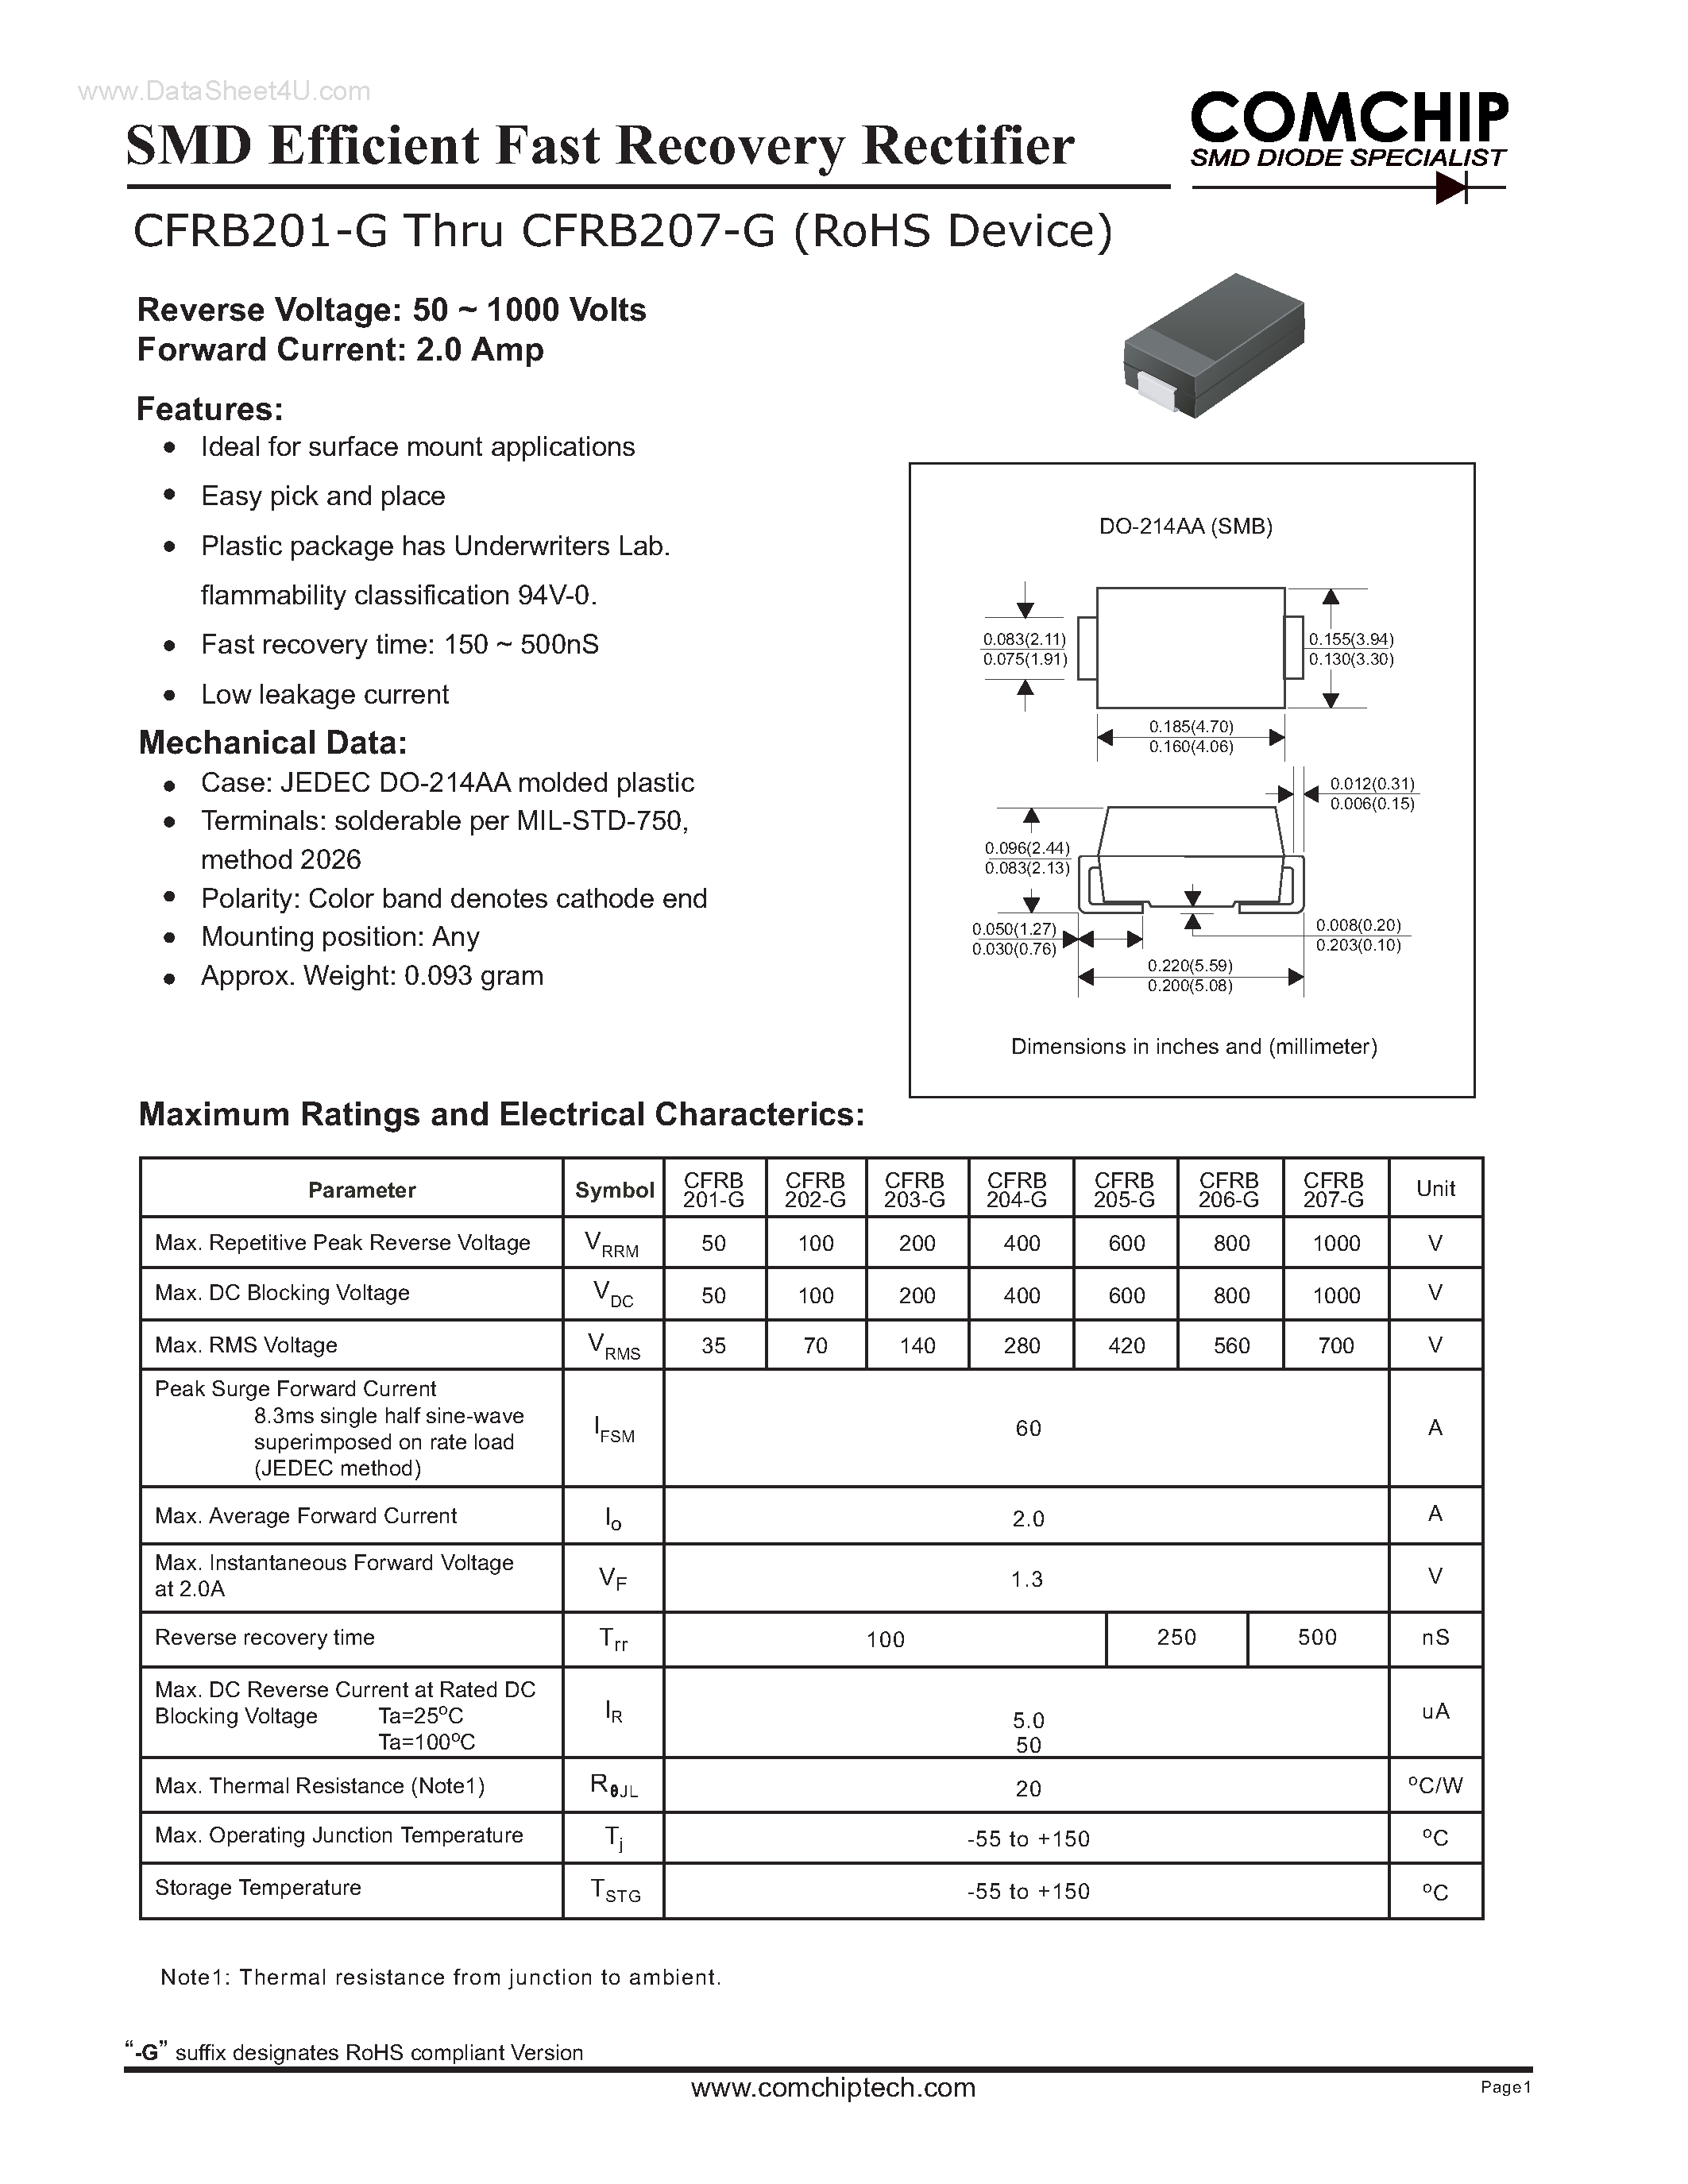 Даташит CFRB201-G - (CFRB201-G - CFRB207-G) SMD Efficient Fast Recovery Rectifier страница 1